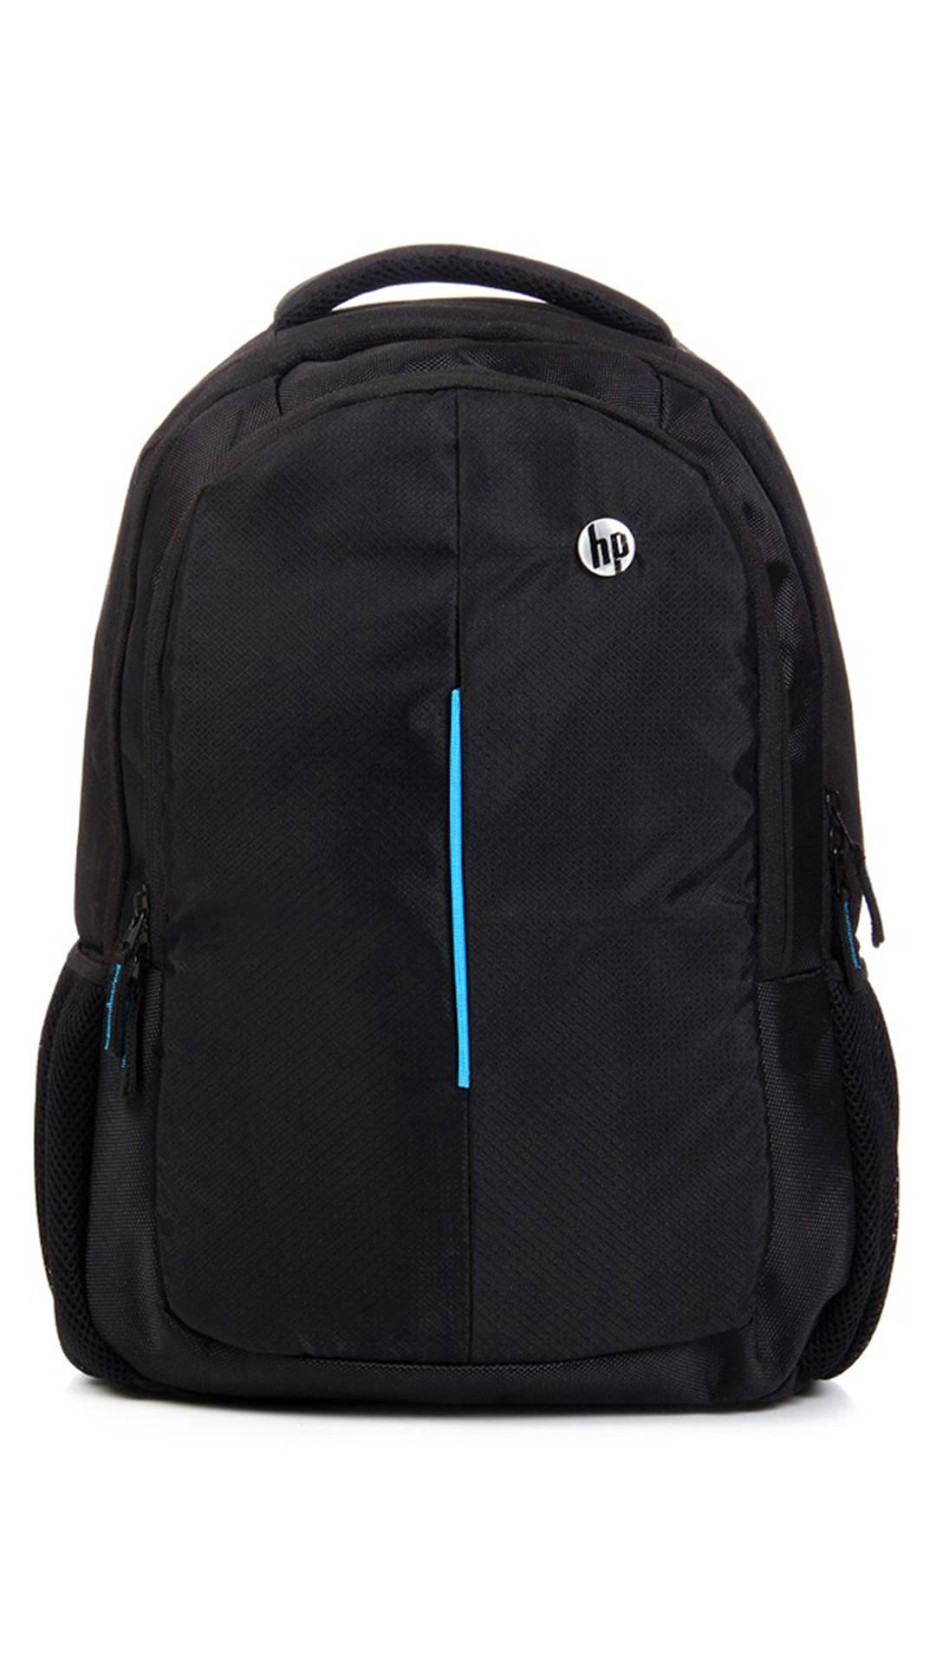 HP 15.6 inch Laptop Backpack Black - Price in India | 0